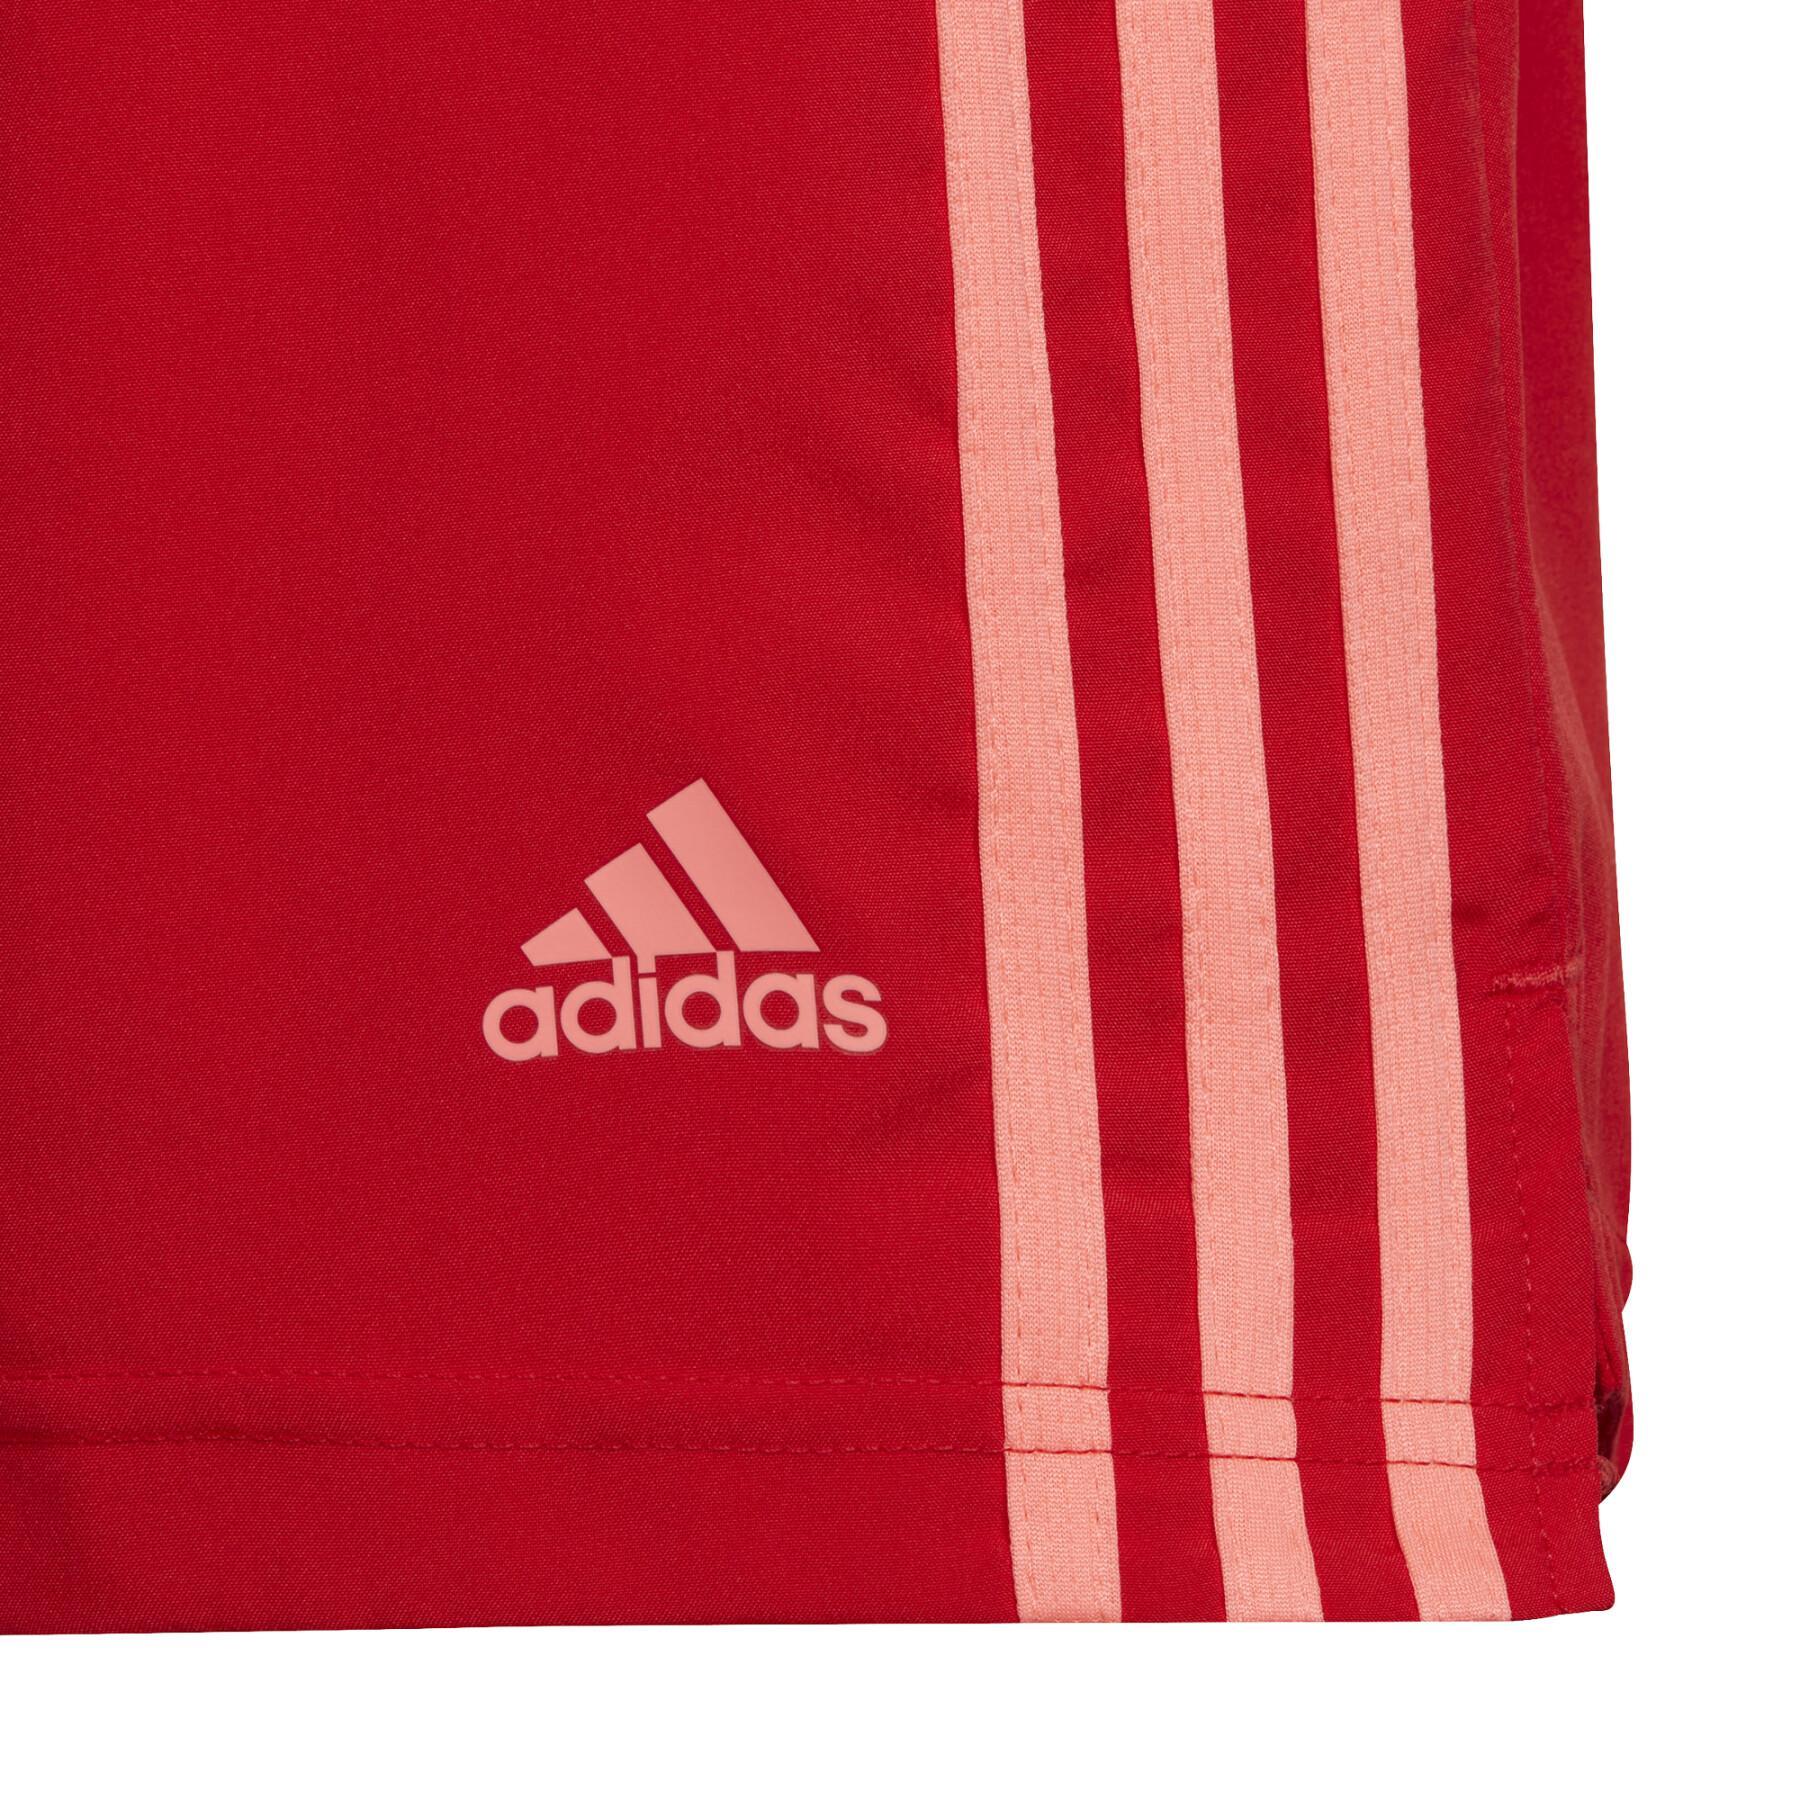 Short fille adidas Designed To Move 3-Stripes